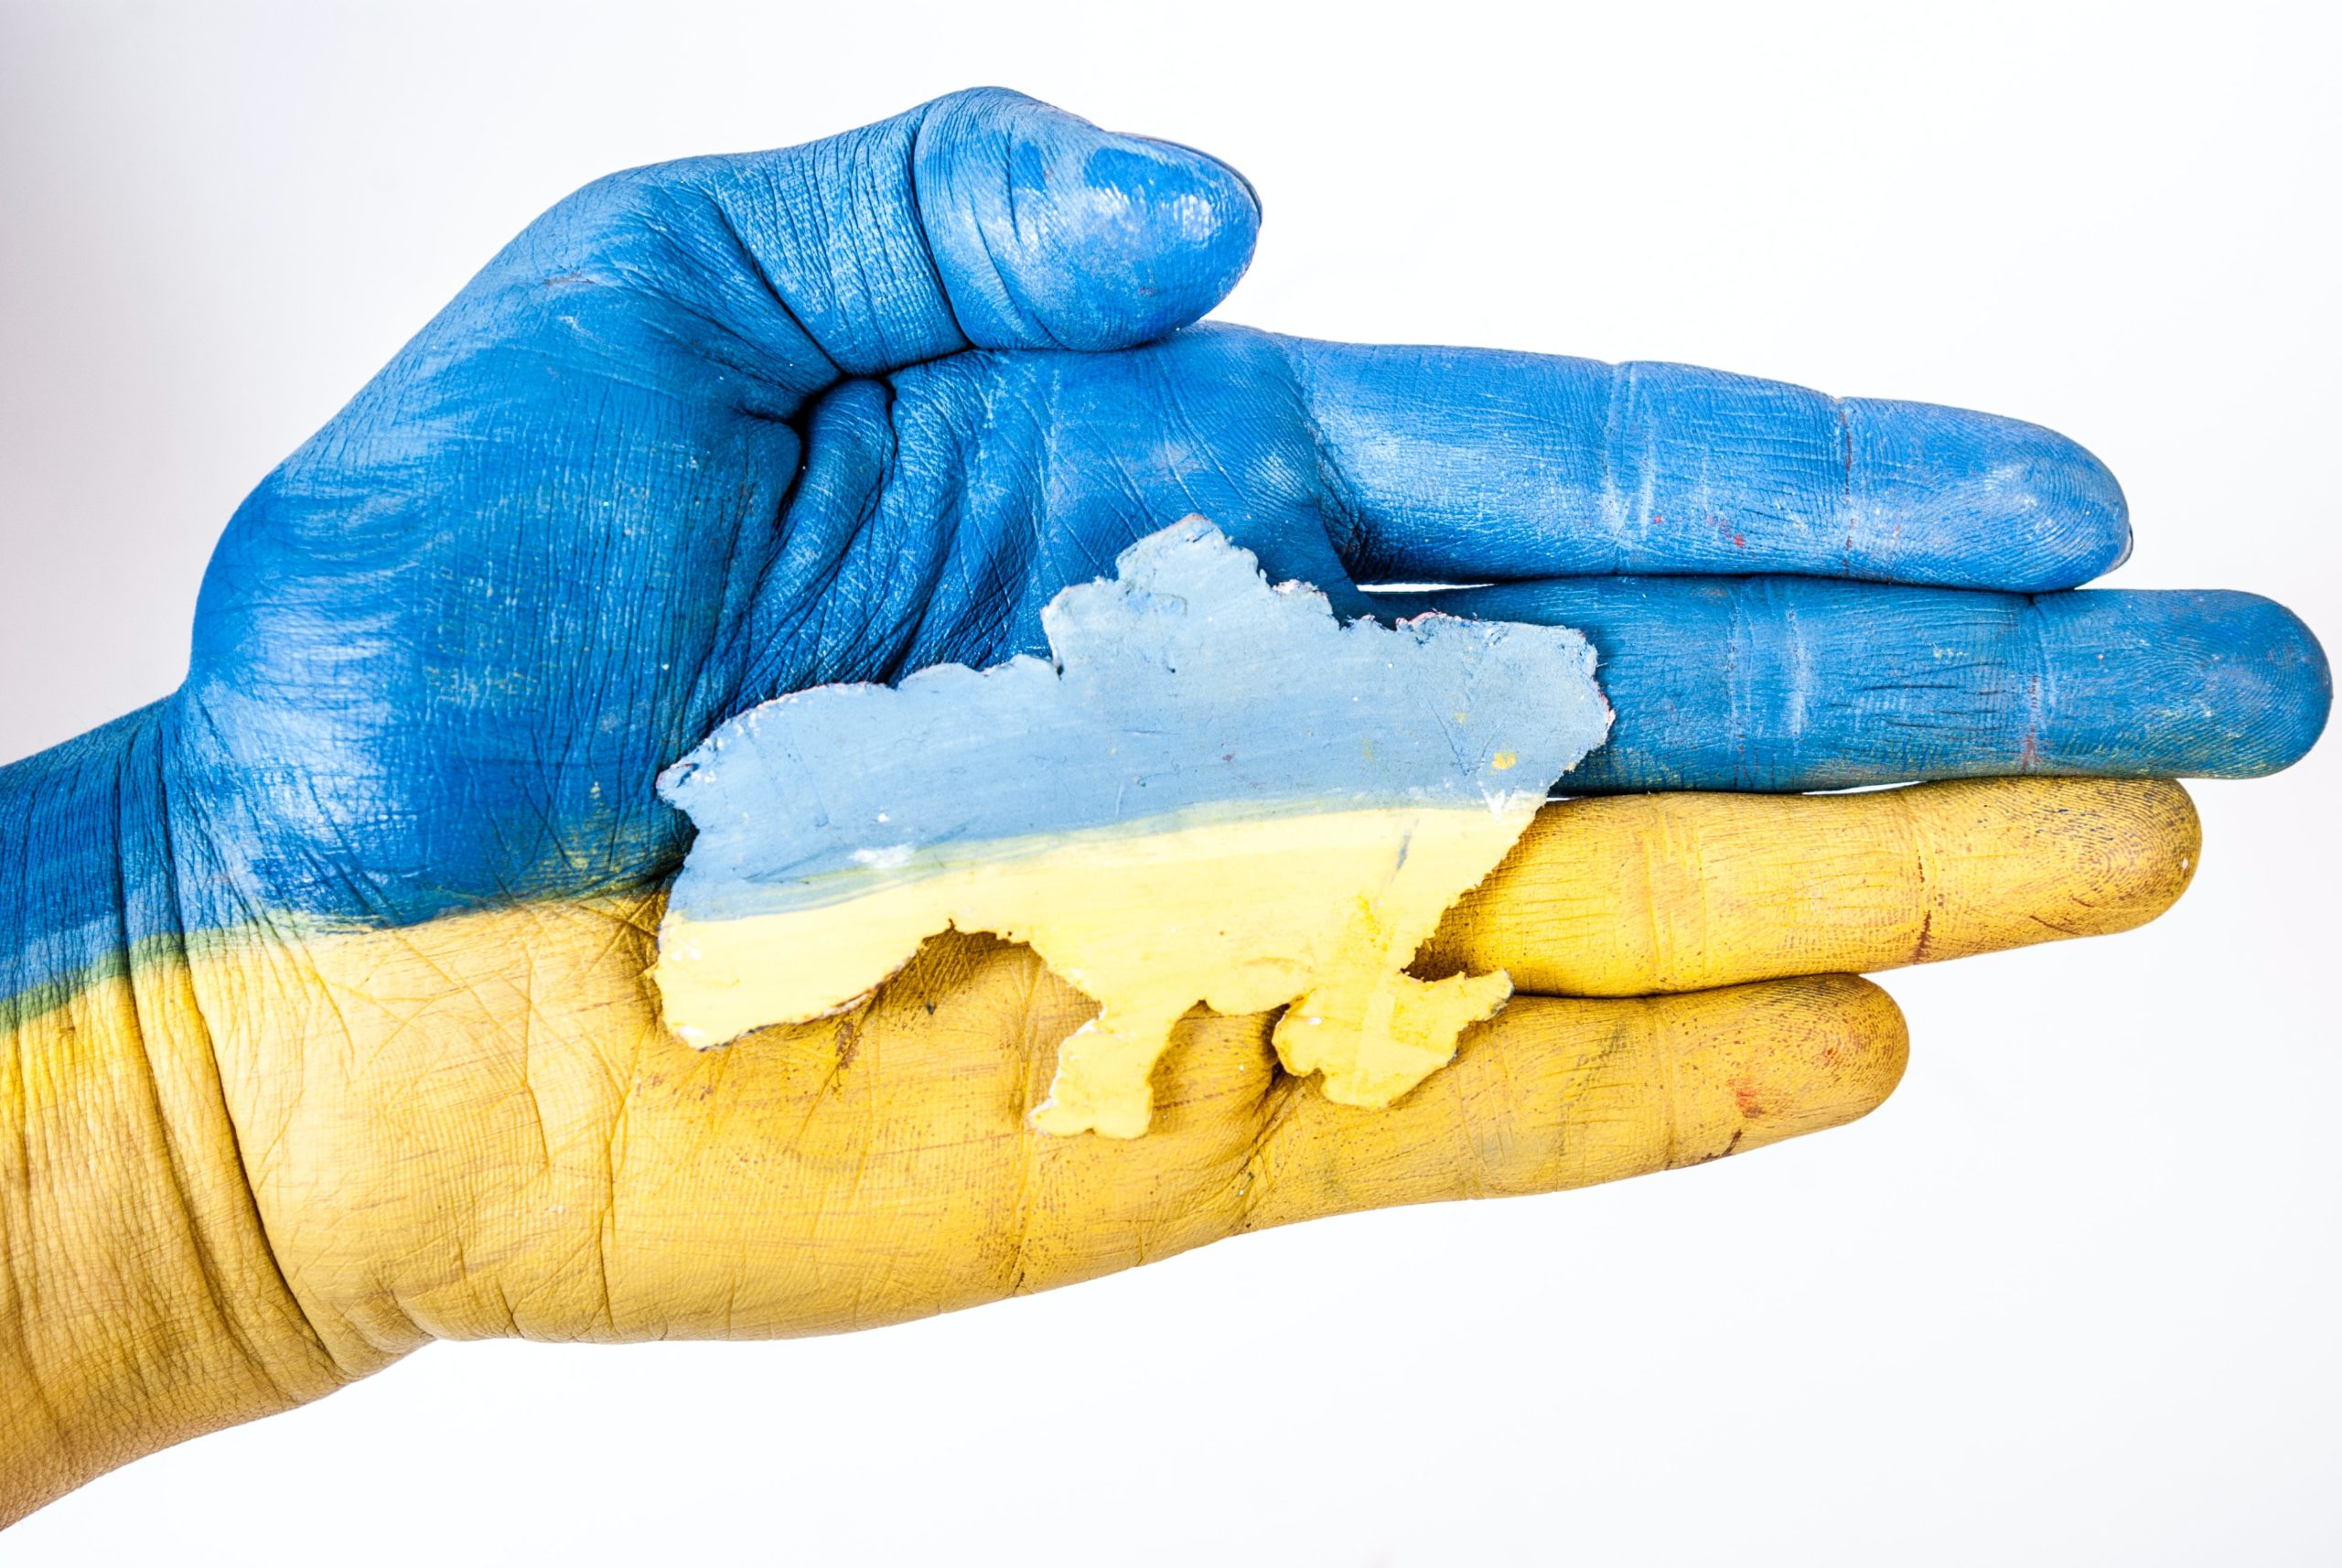 A hand colored in Ukraine's flag colors.